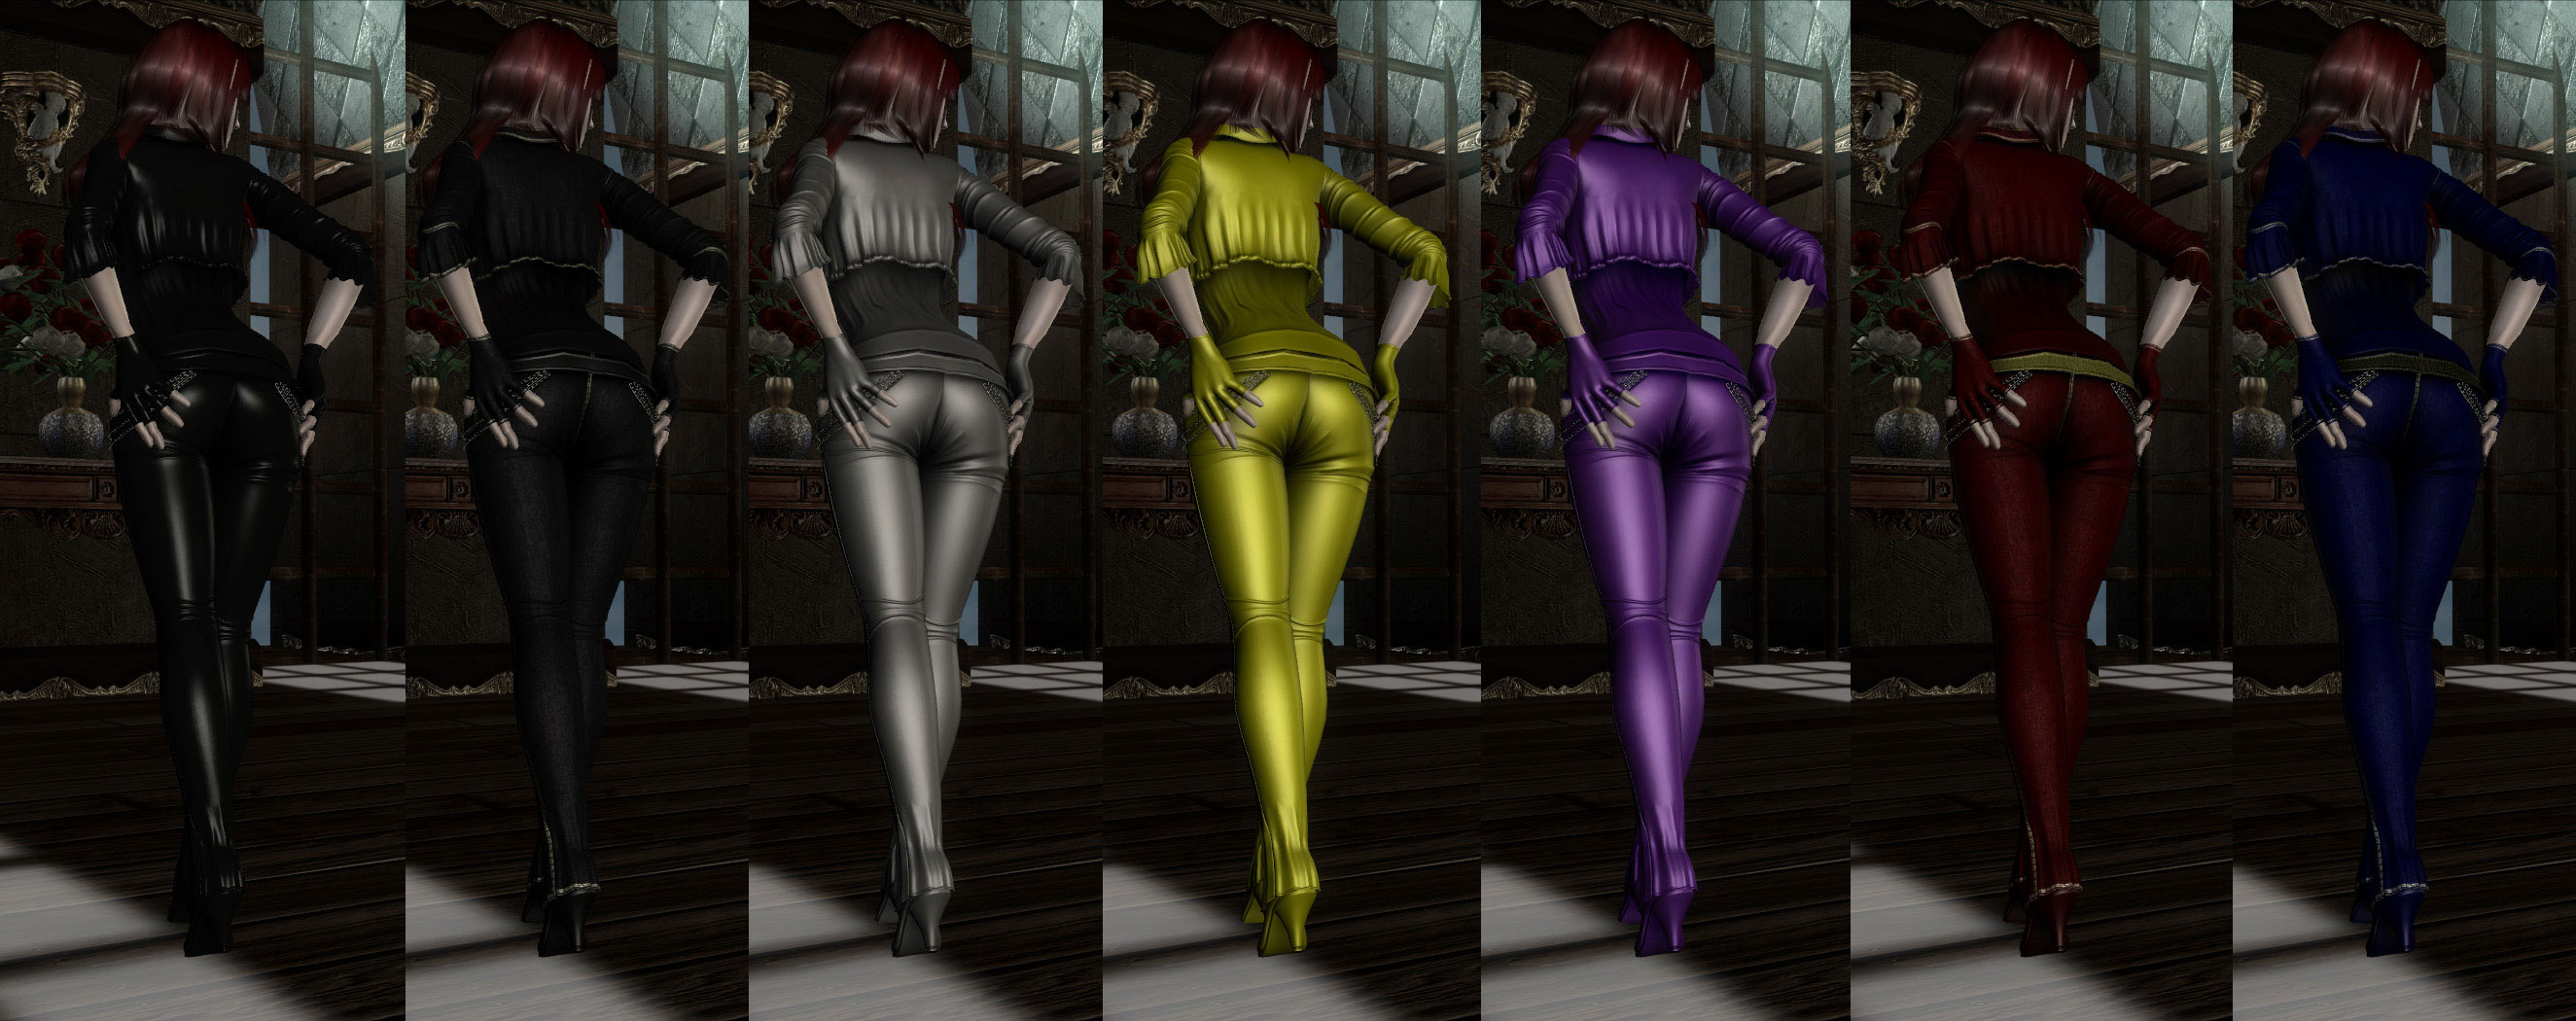 Killer catsuit fallout 4 фото 3